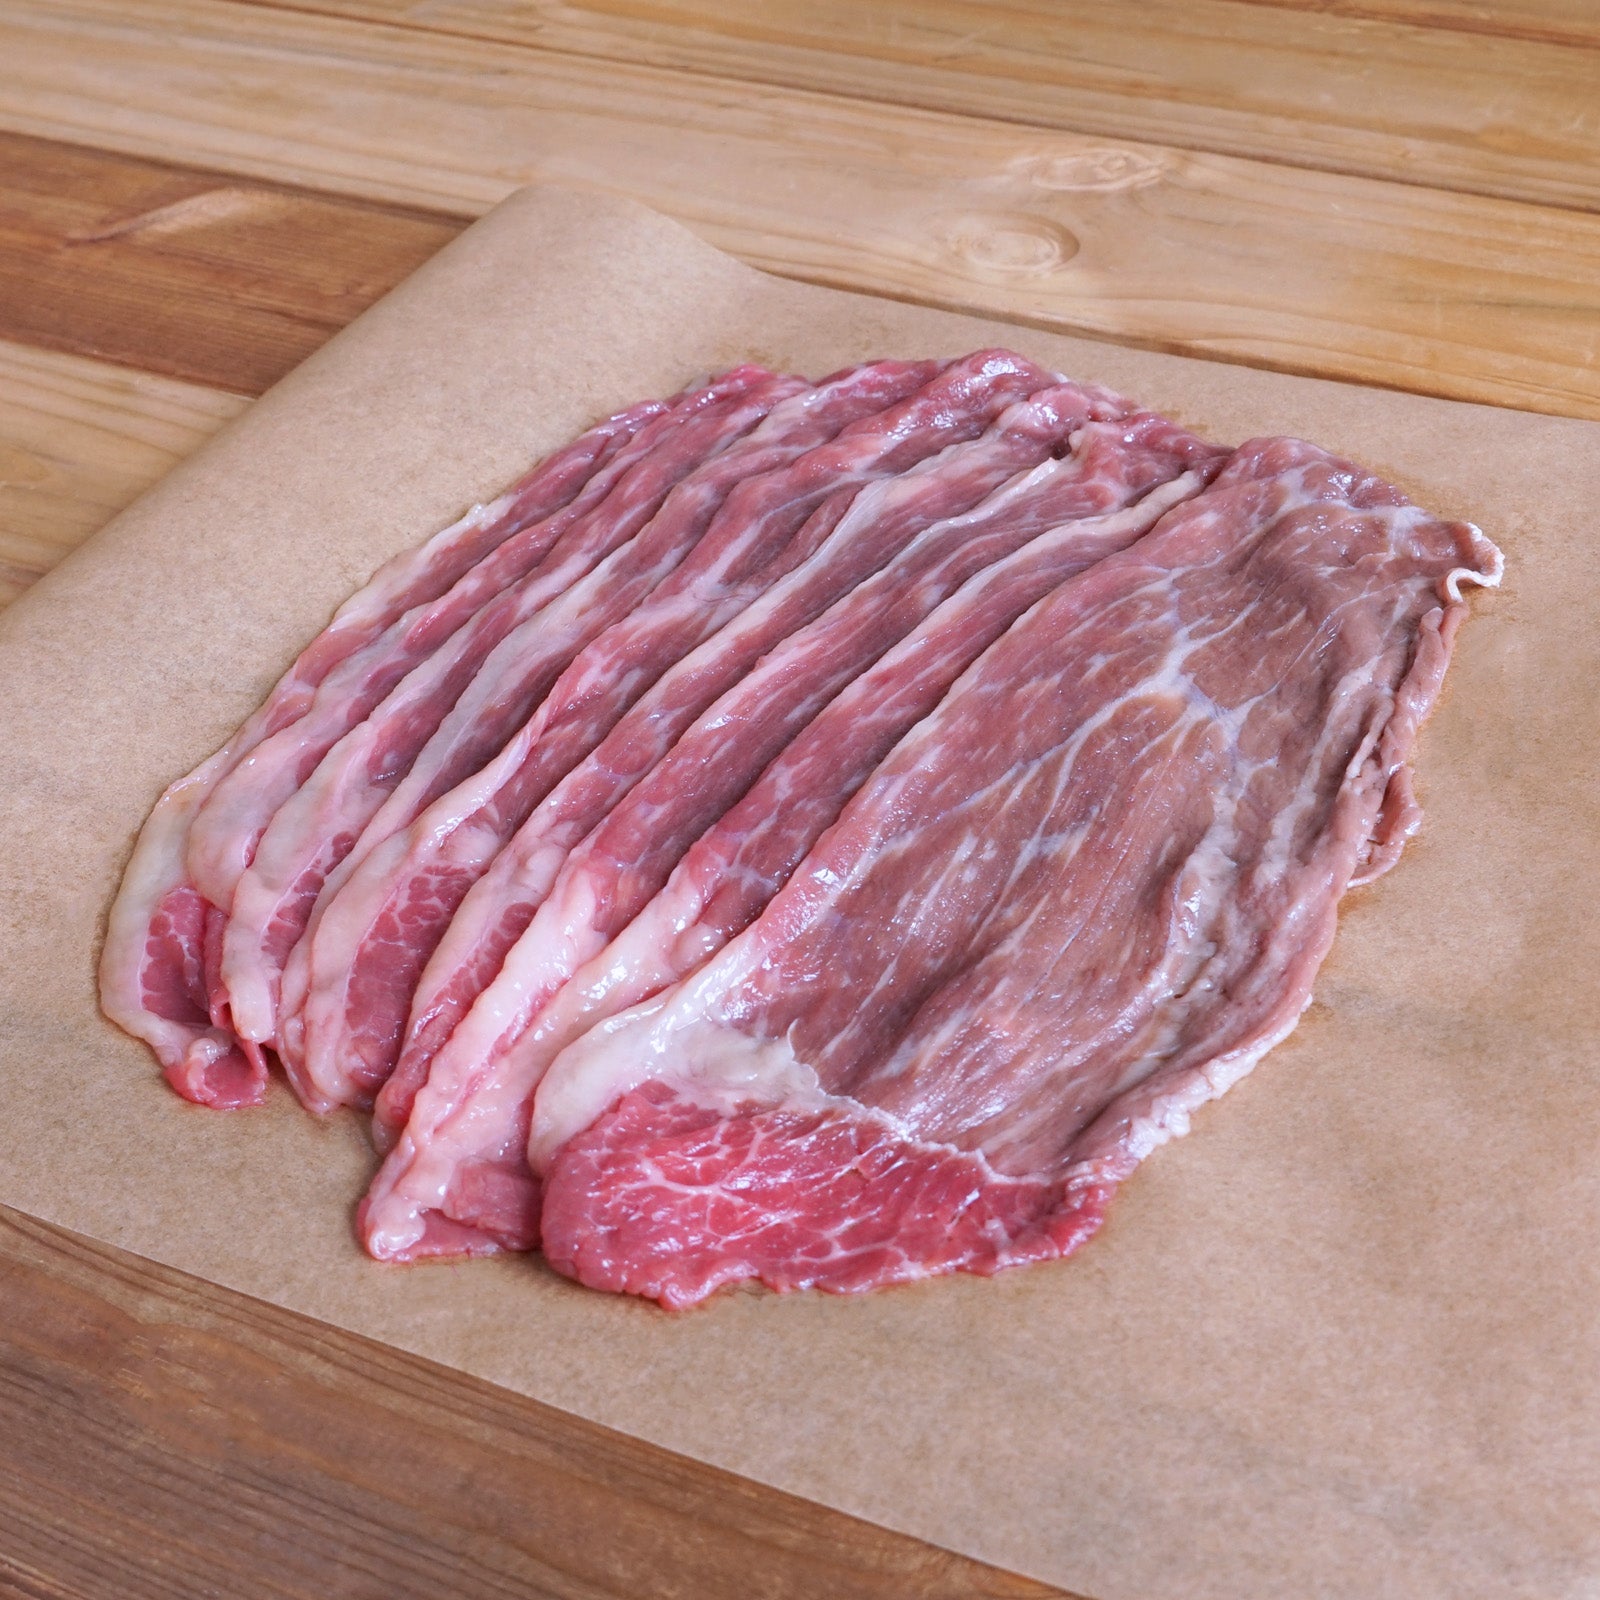 Japanese Range-Free Wagyu Beef Shank Thin Slices from Iwate (300g) - Horizon Farms